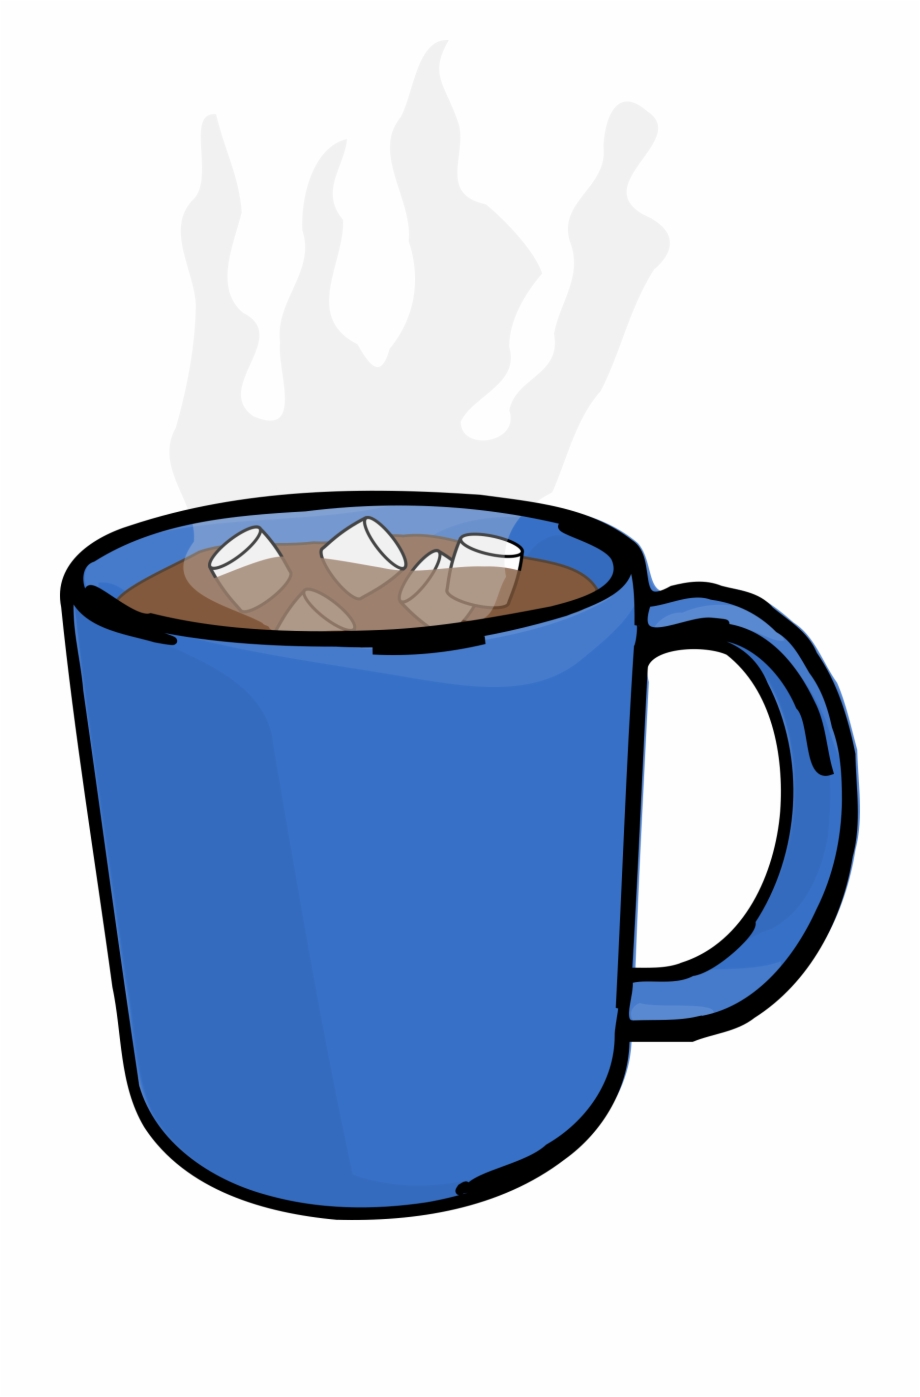 Clipart Hot Chocolate Cup Download 21 059 chocolate cup hot stock ...